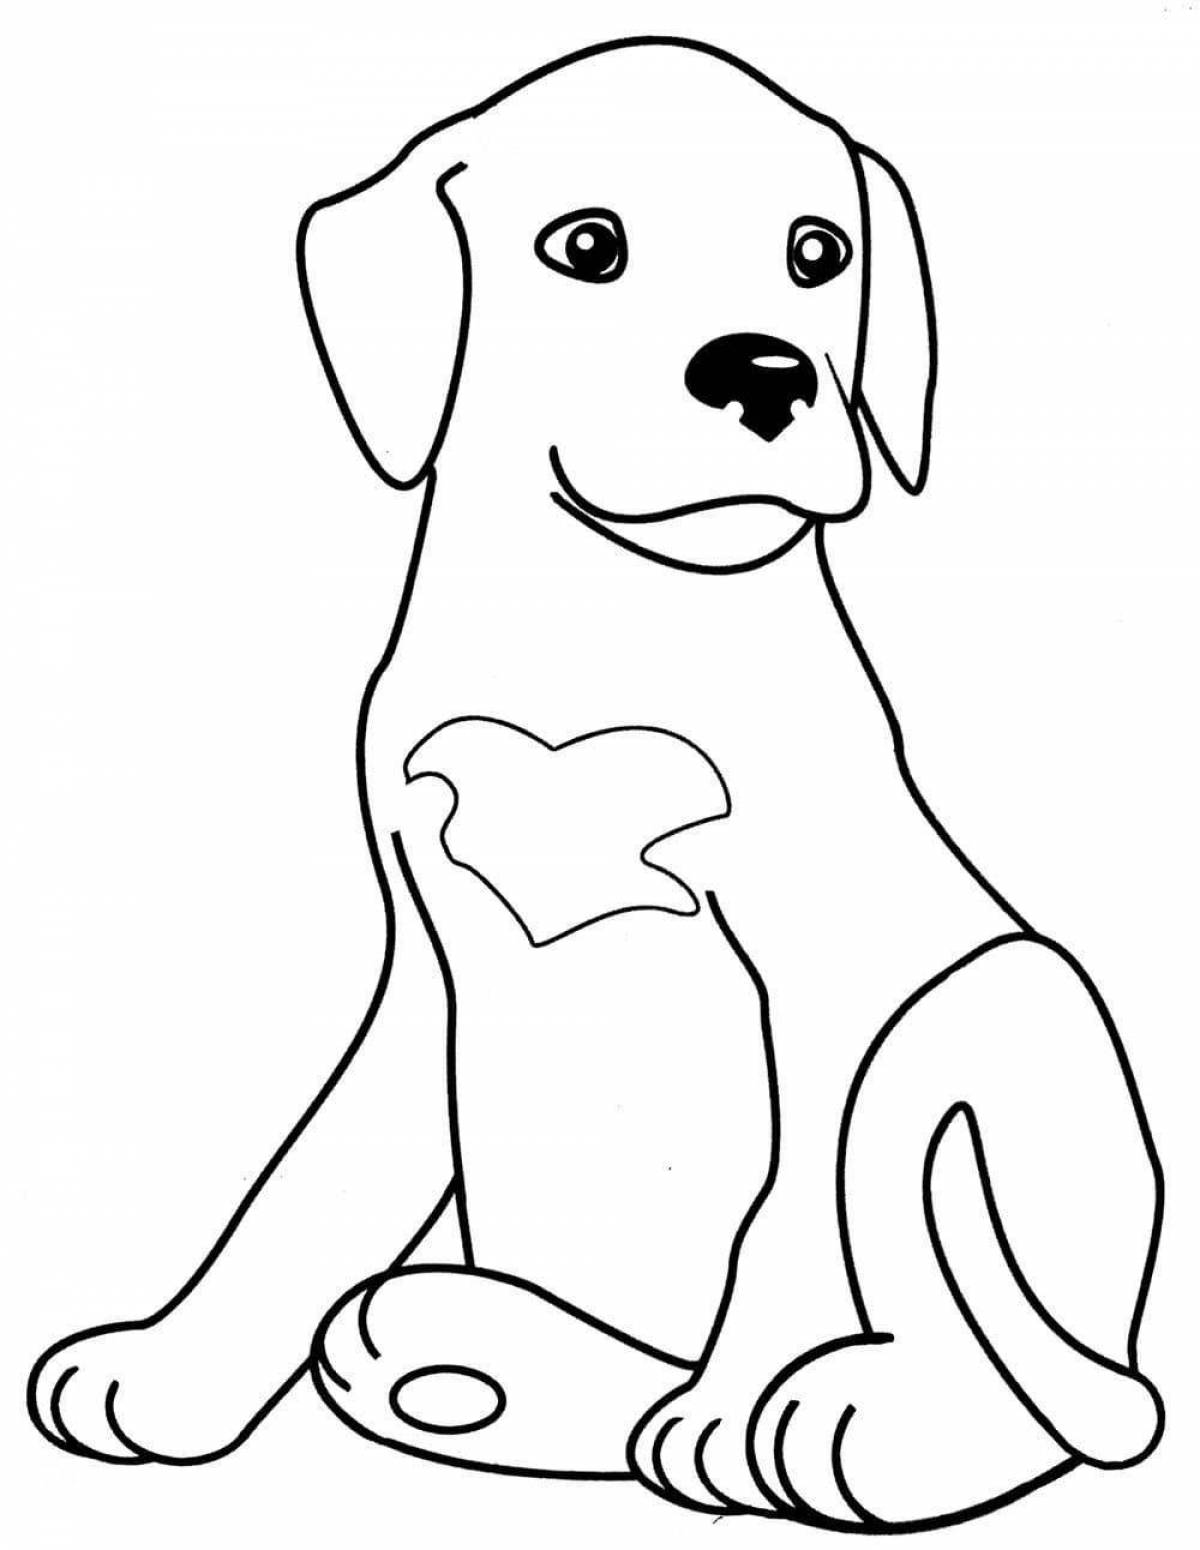 Dog picture for kids #9